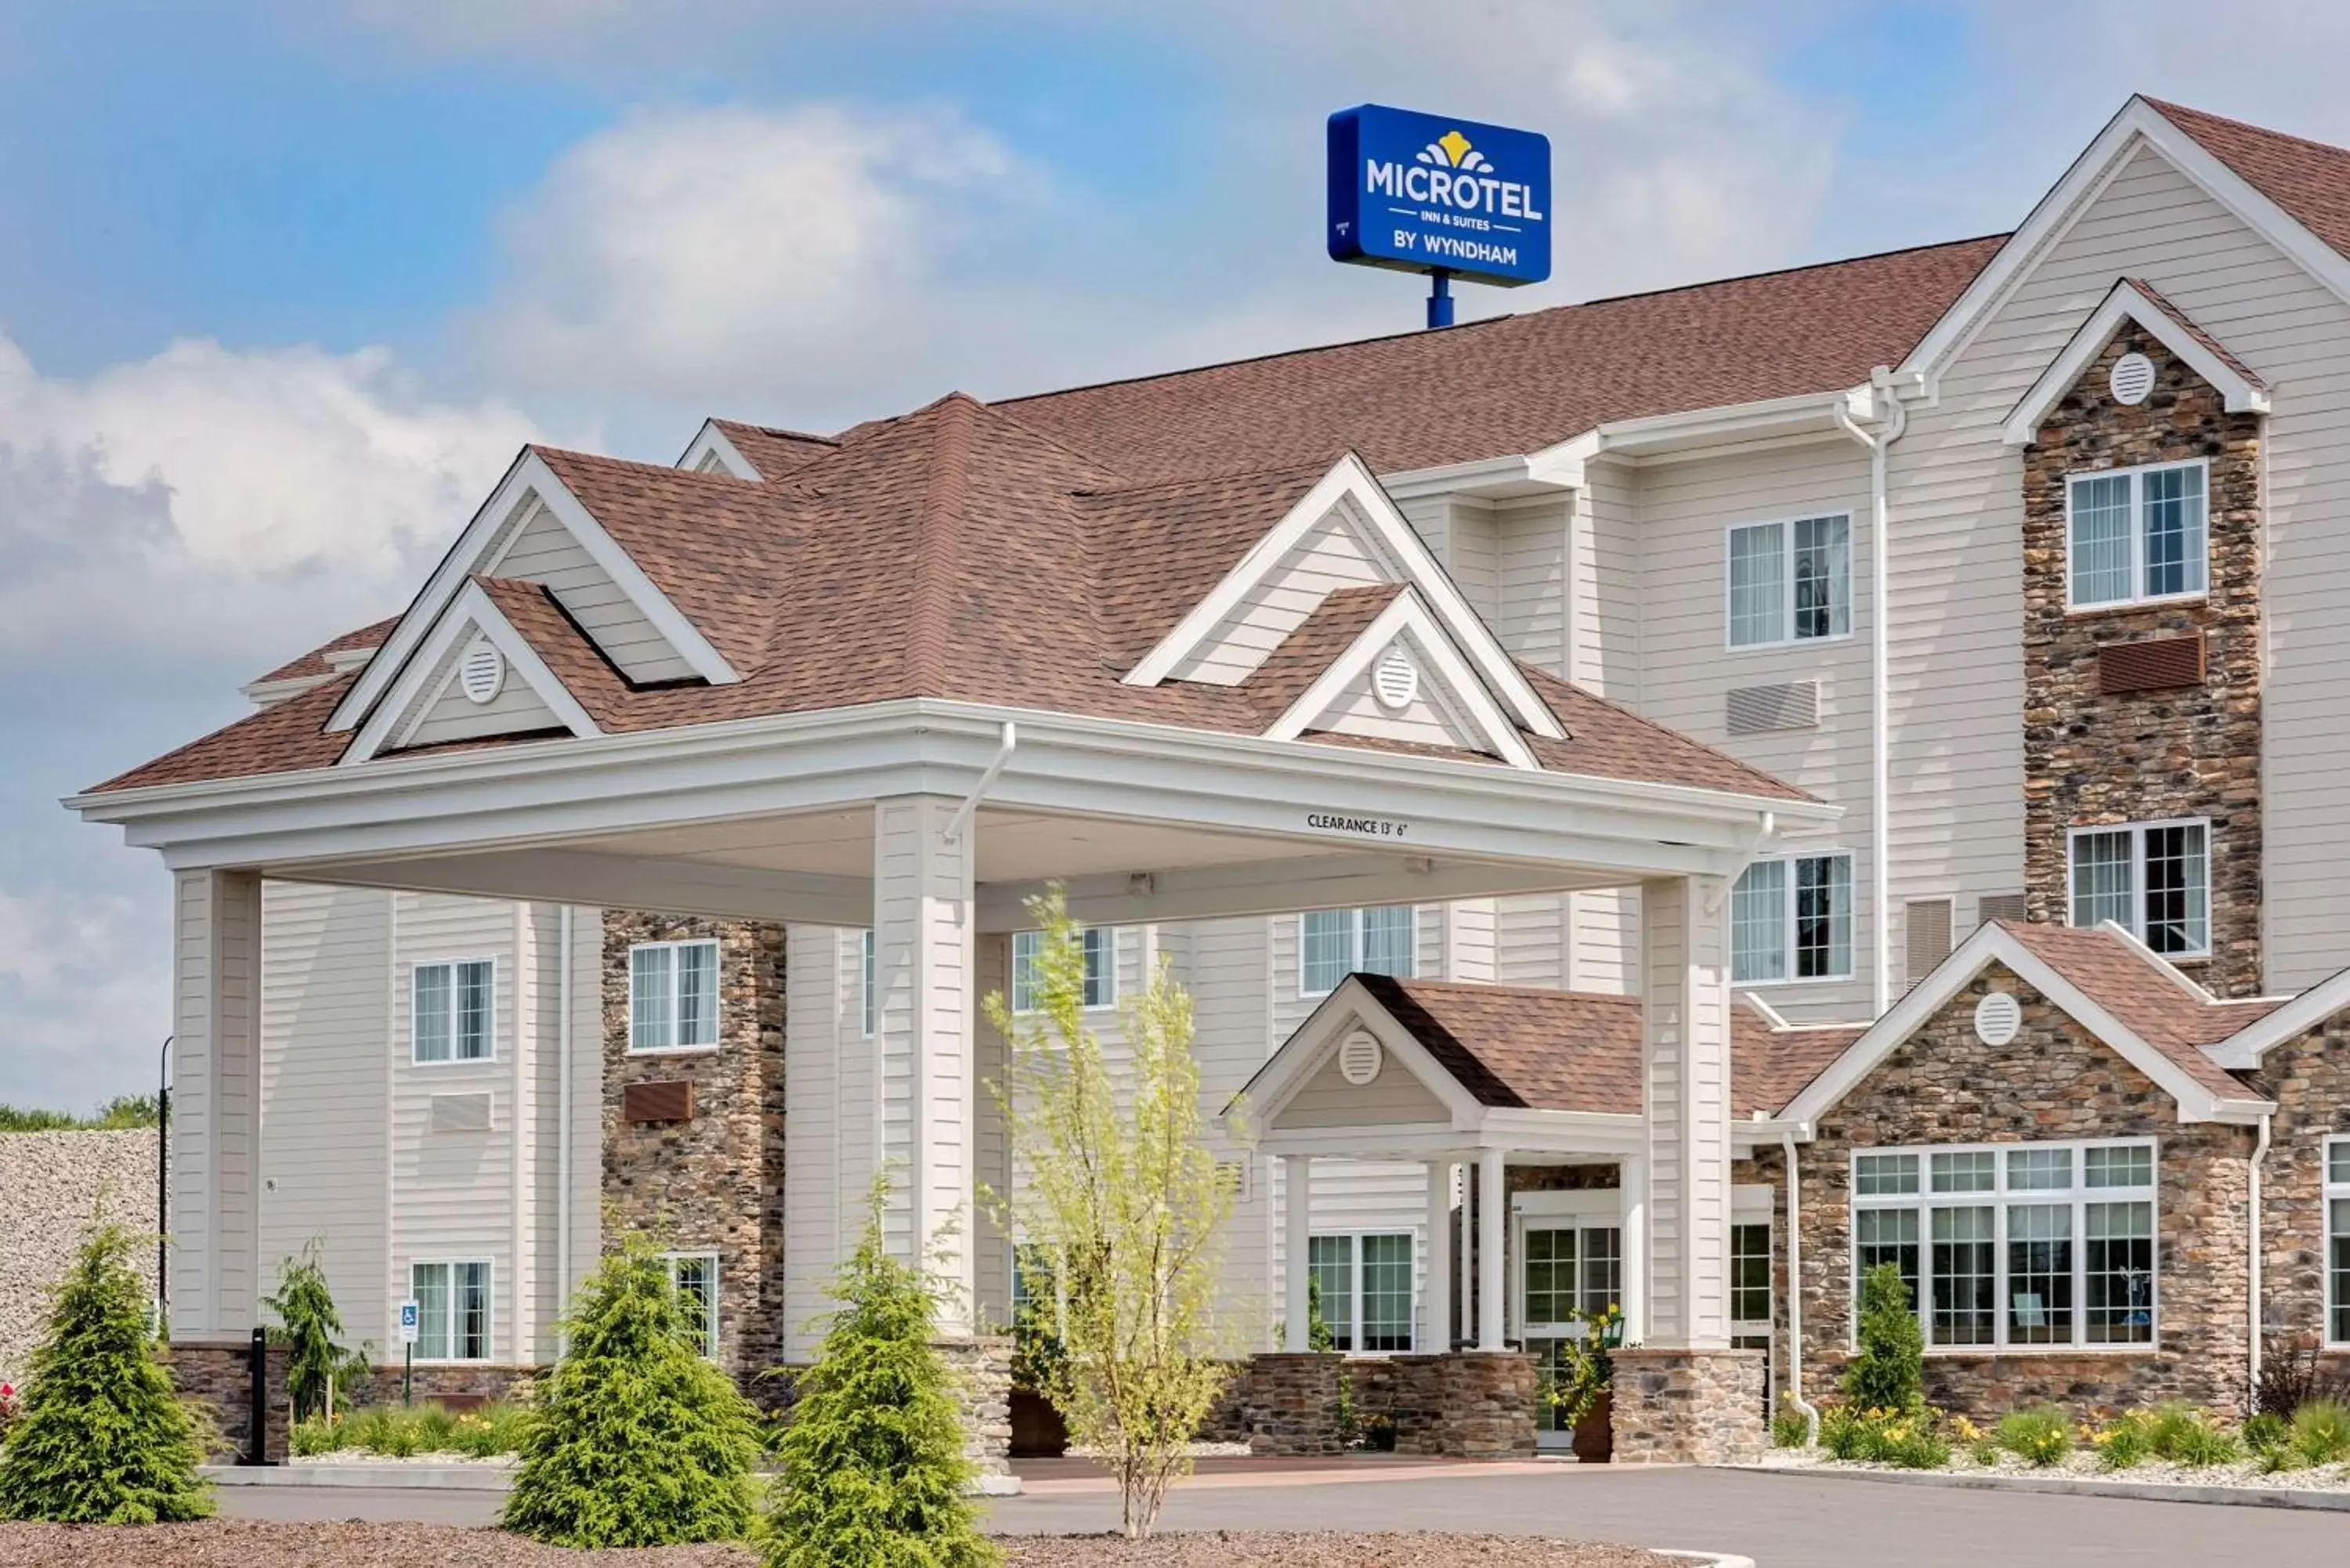 Property Building in Microtel Inn & Suites by Wyndham Clarion